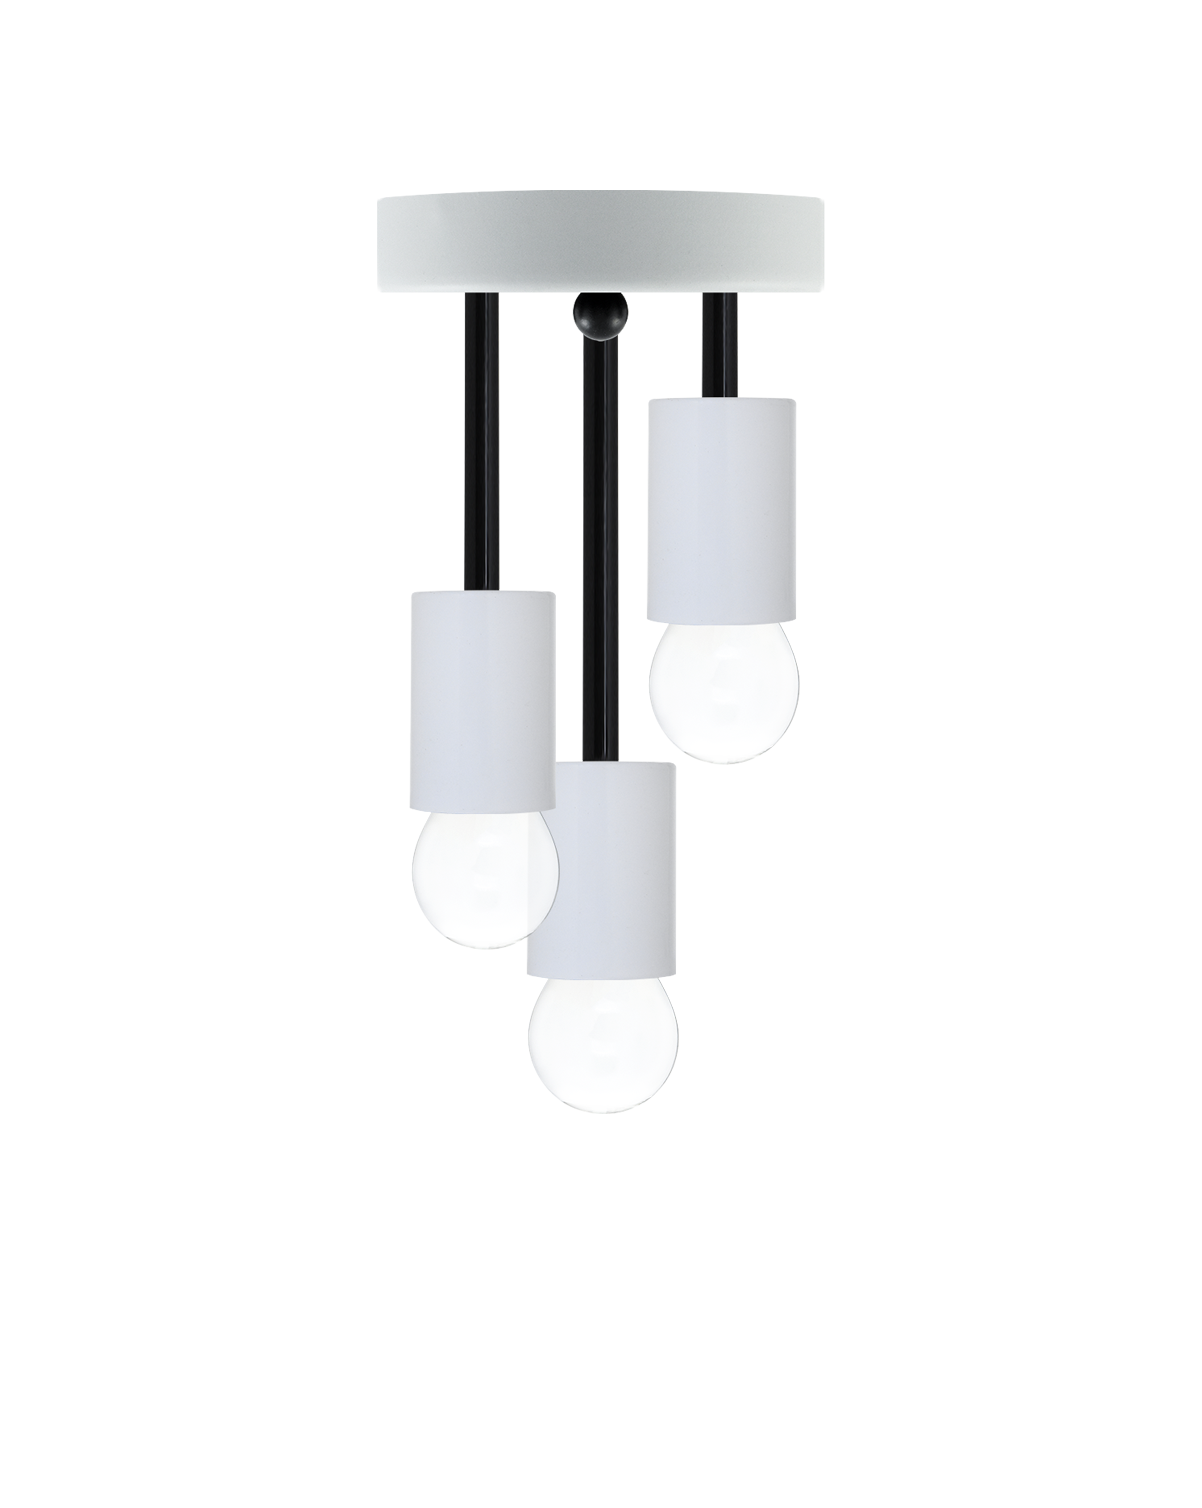 Semi-flush mount light fixture with a white base, three hanging bulbs with matching white cylindrical housings, and black stems.